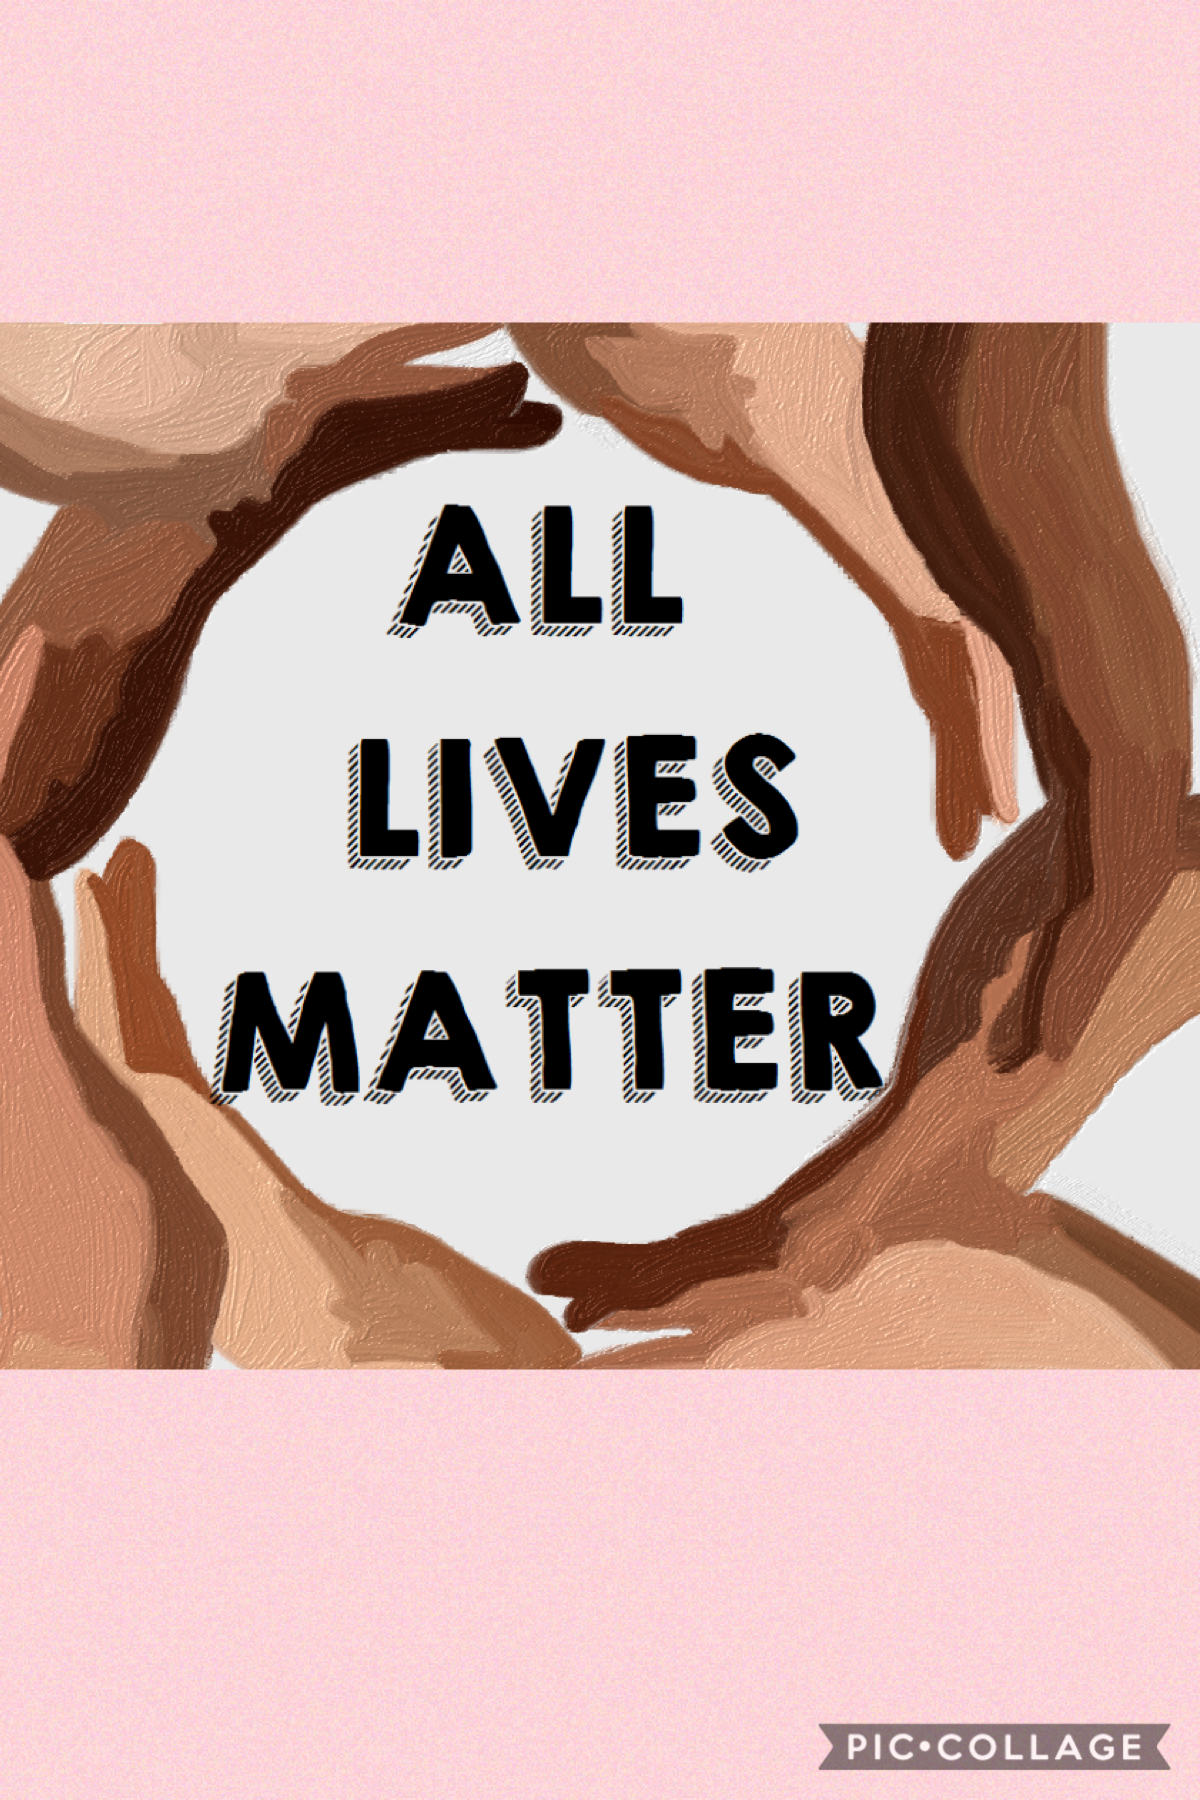 Know matter what color skin you have All Lives Matter!:) God looks at us all equally so we should do the same too!😊